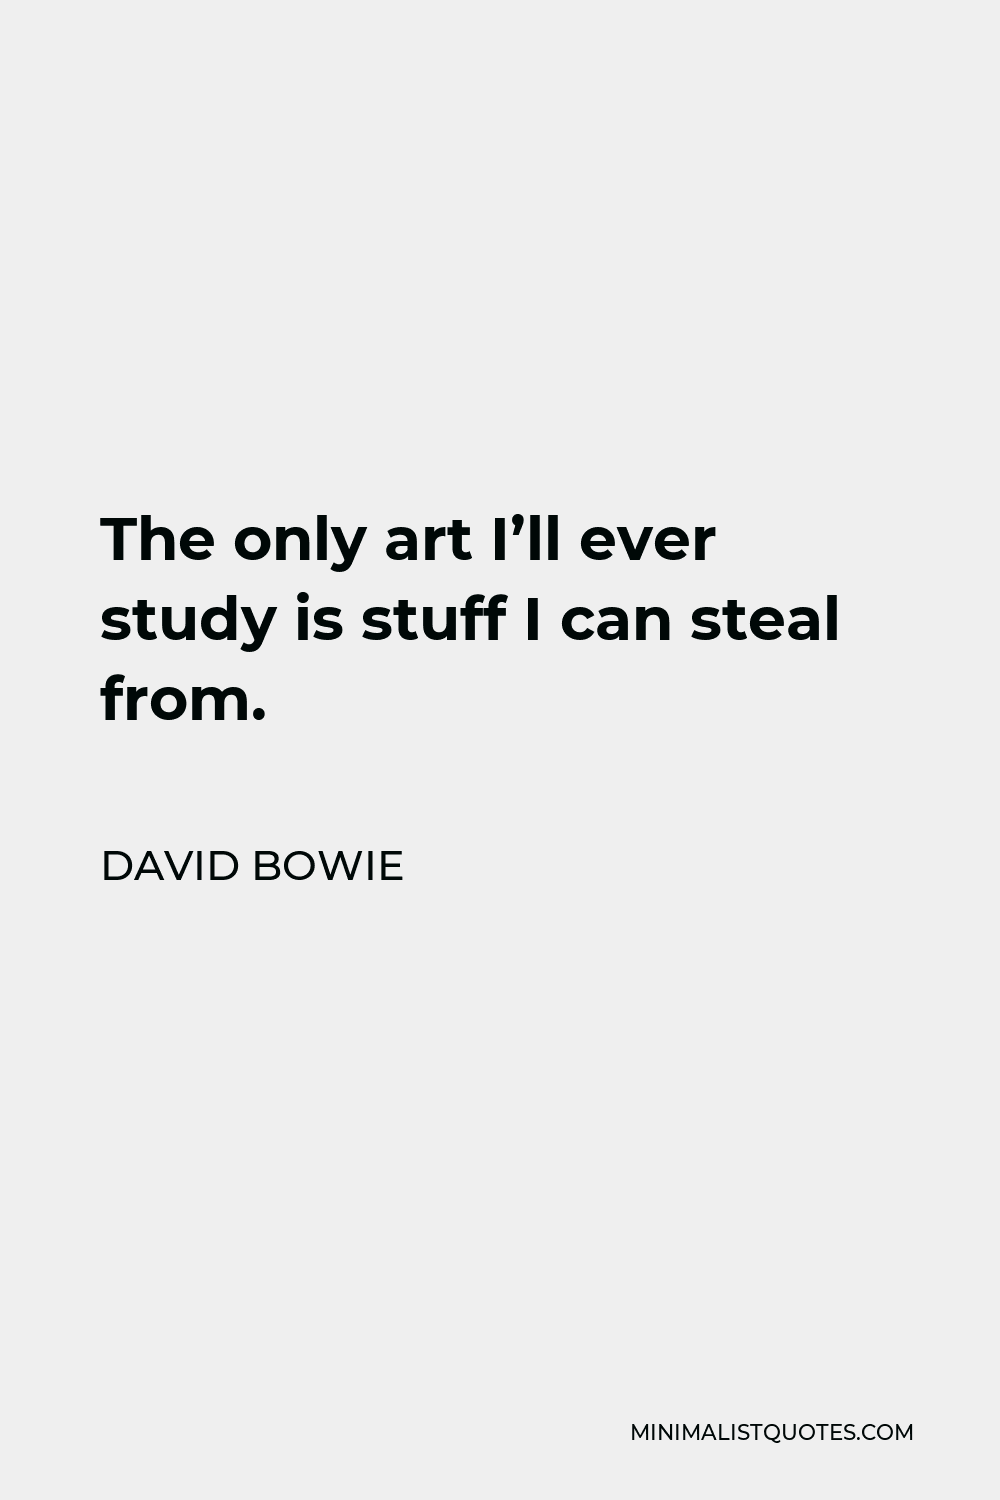 David Bowie Quote - The only art I’ll ever study is stuff I can steal from.